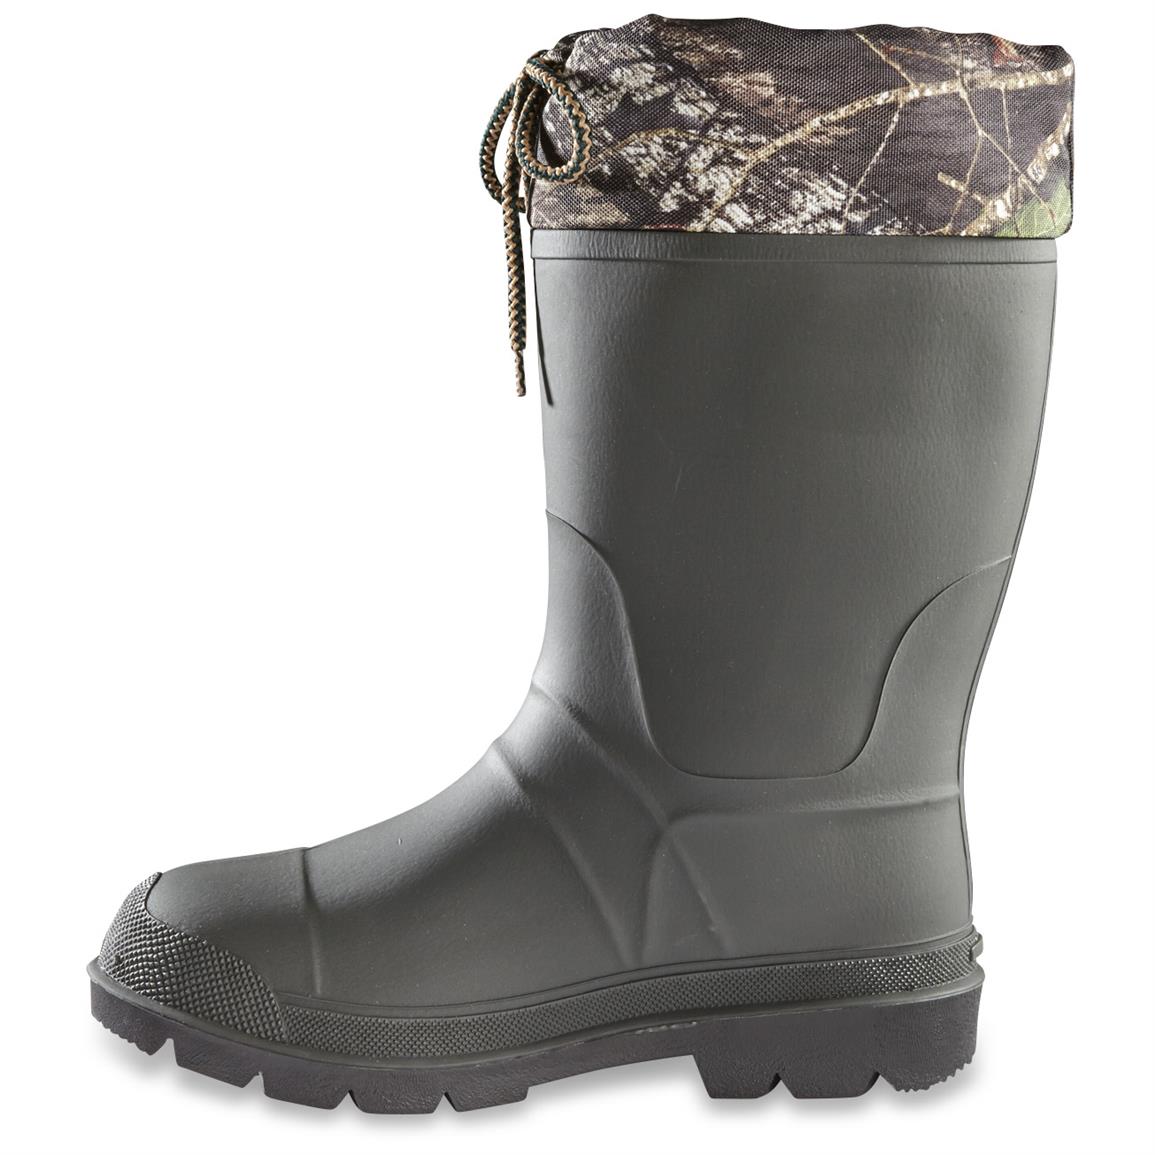 rubber boots with removable liners